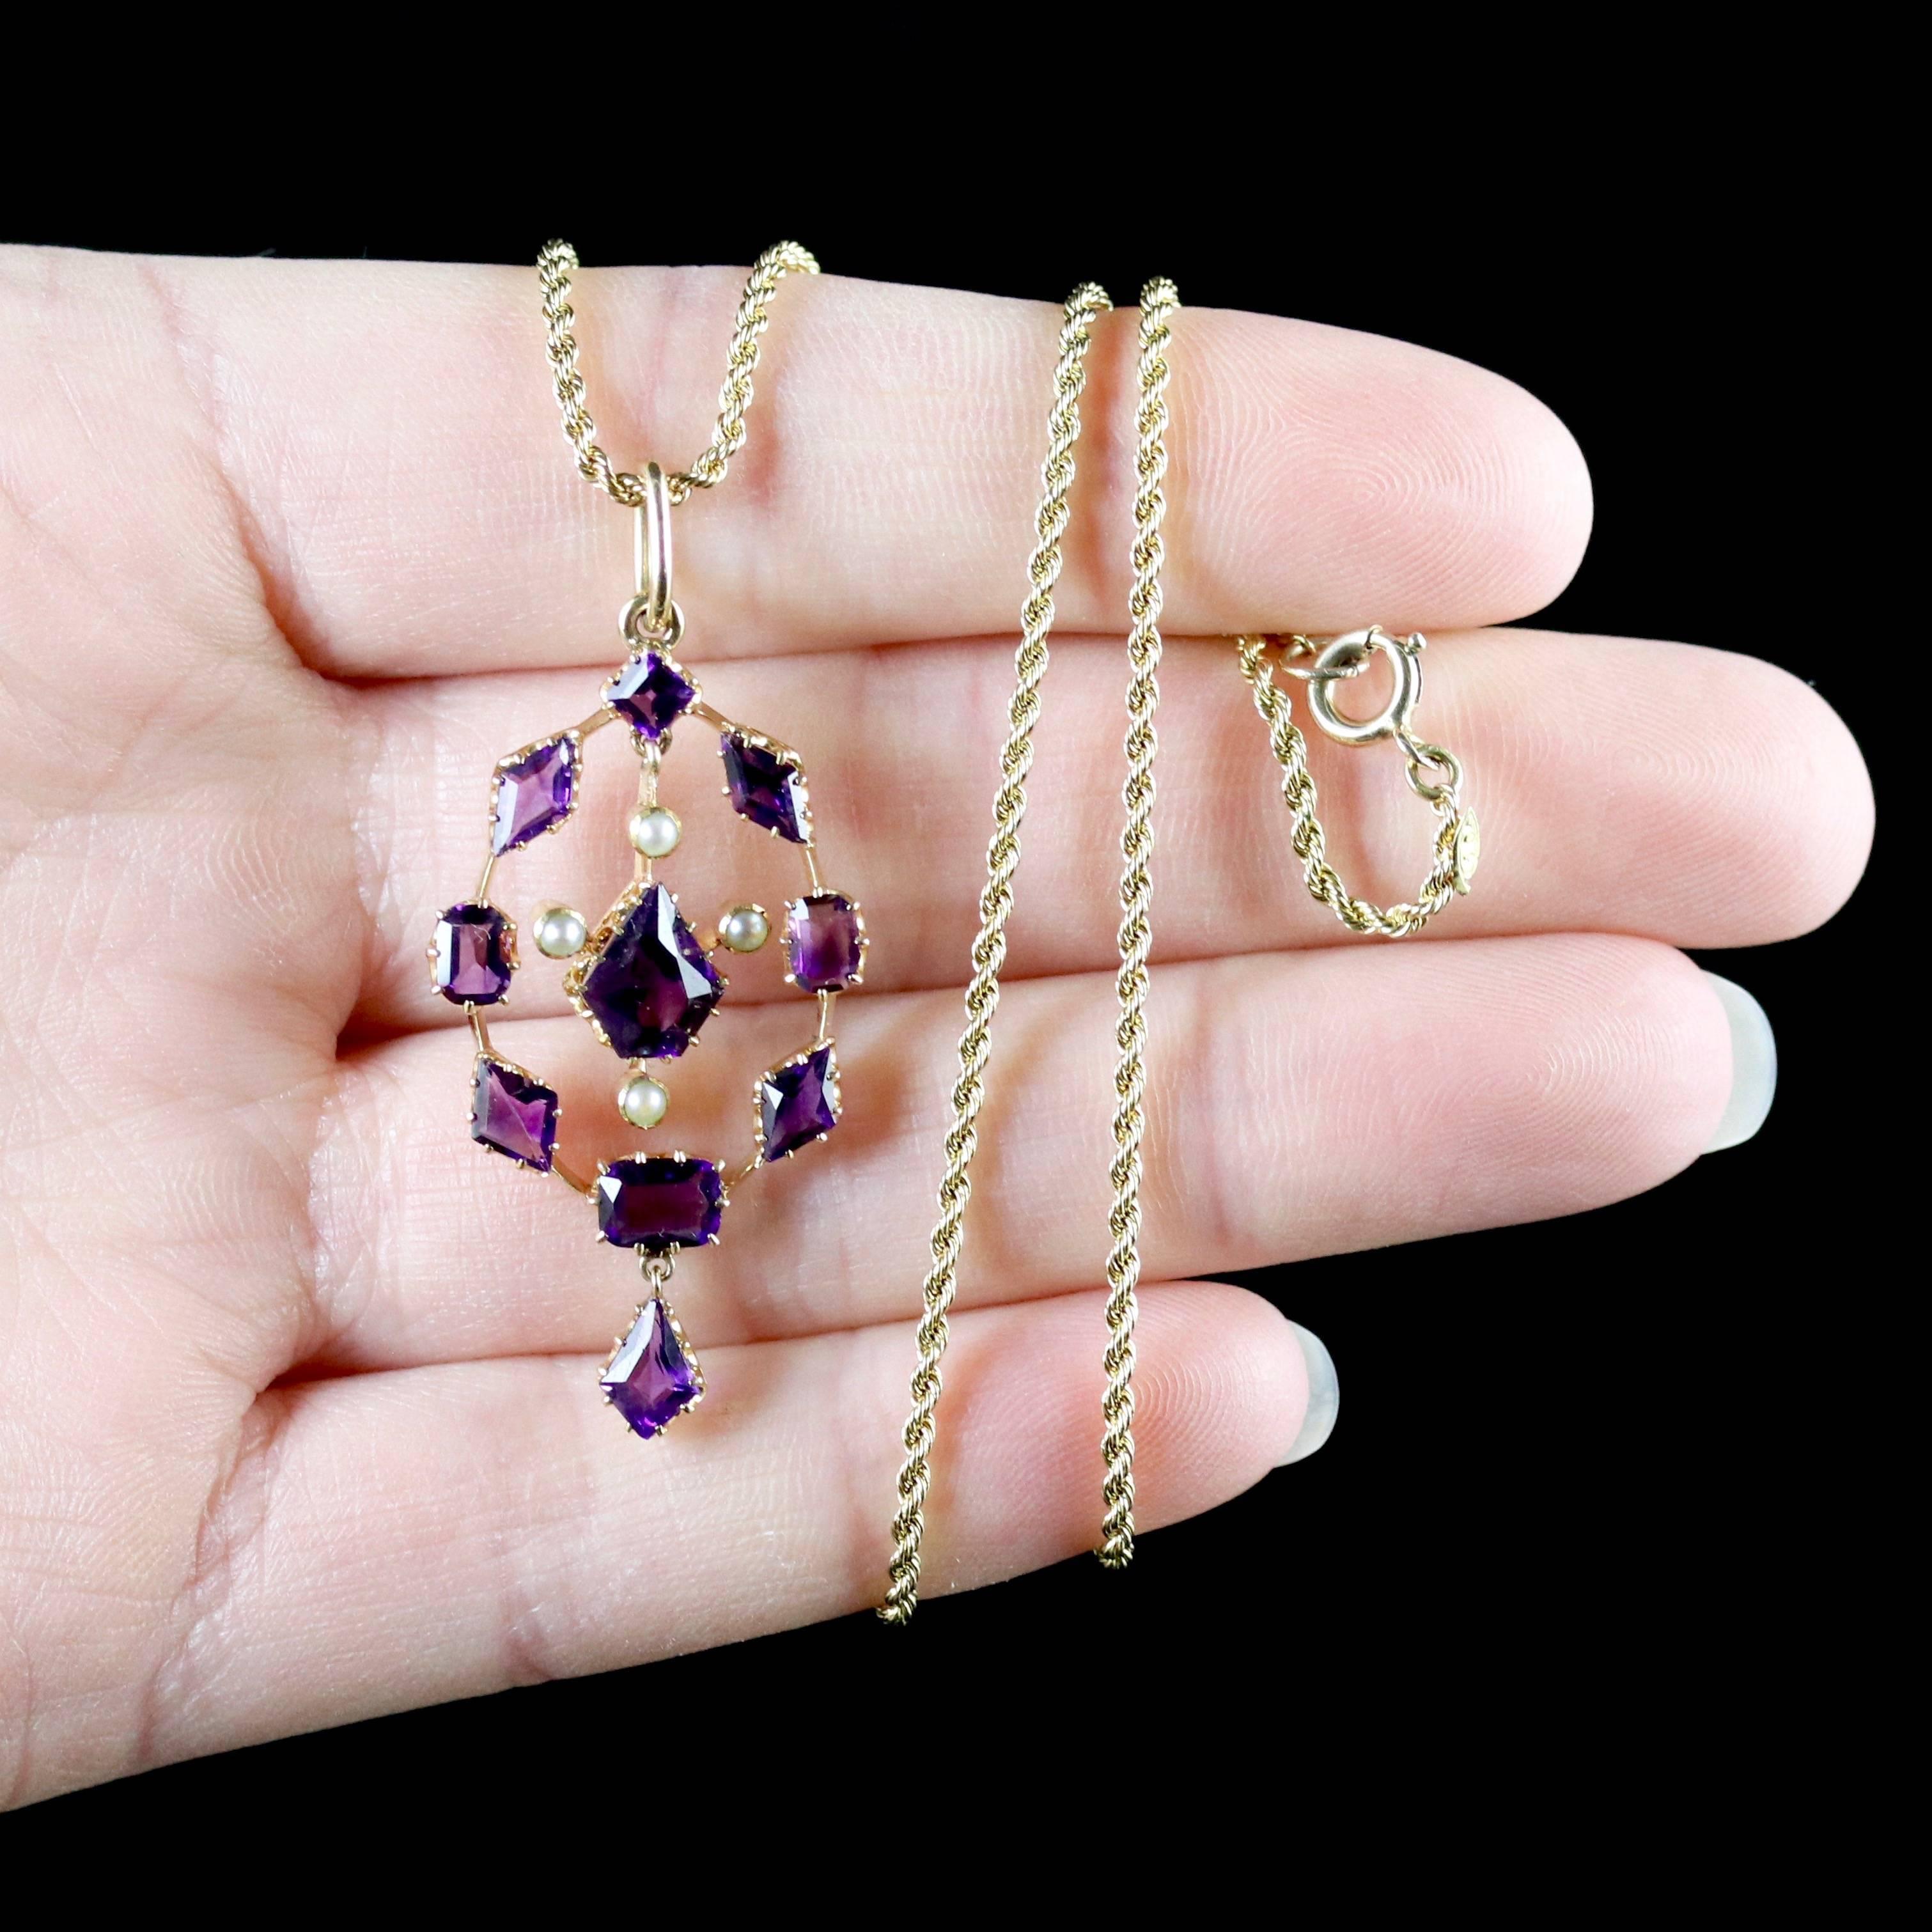 Antique Victorian Amethyst Pendant and Necklace 15 Carat Gold 6